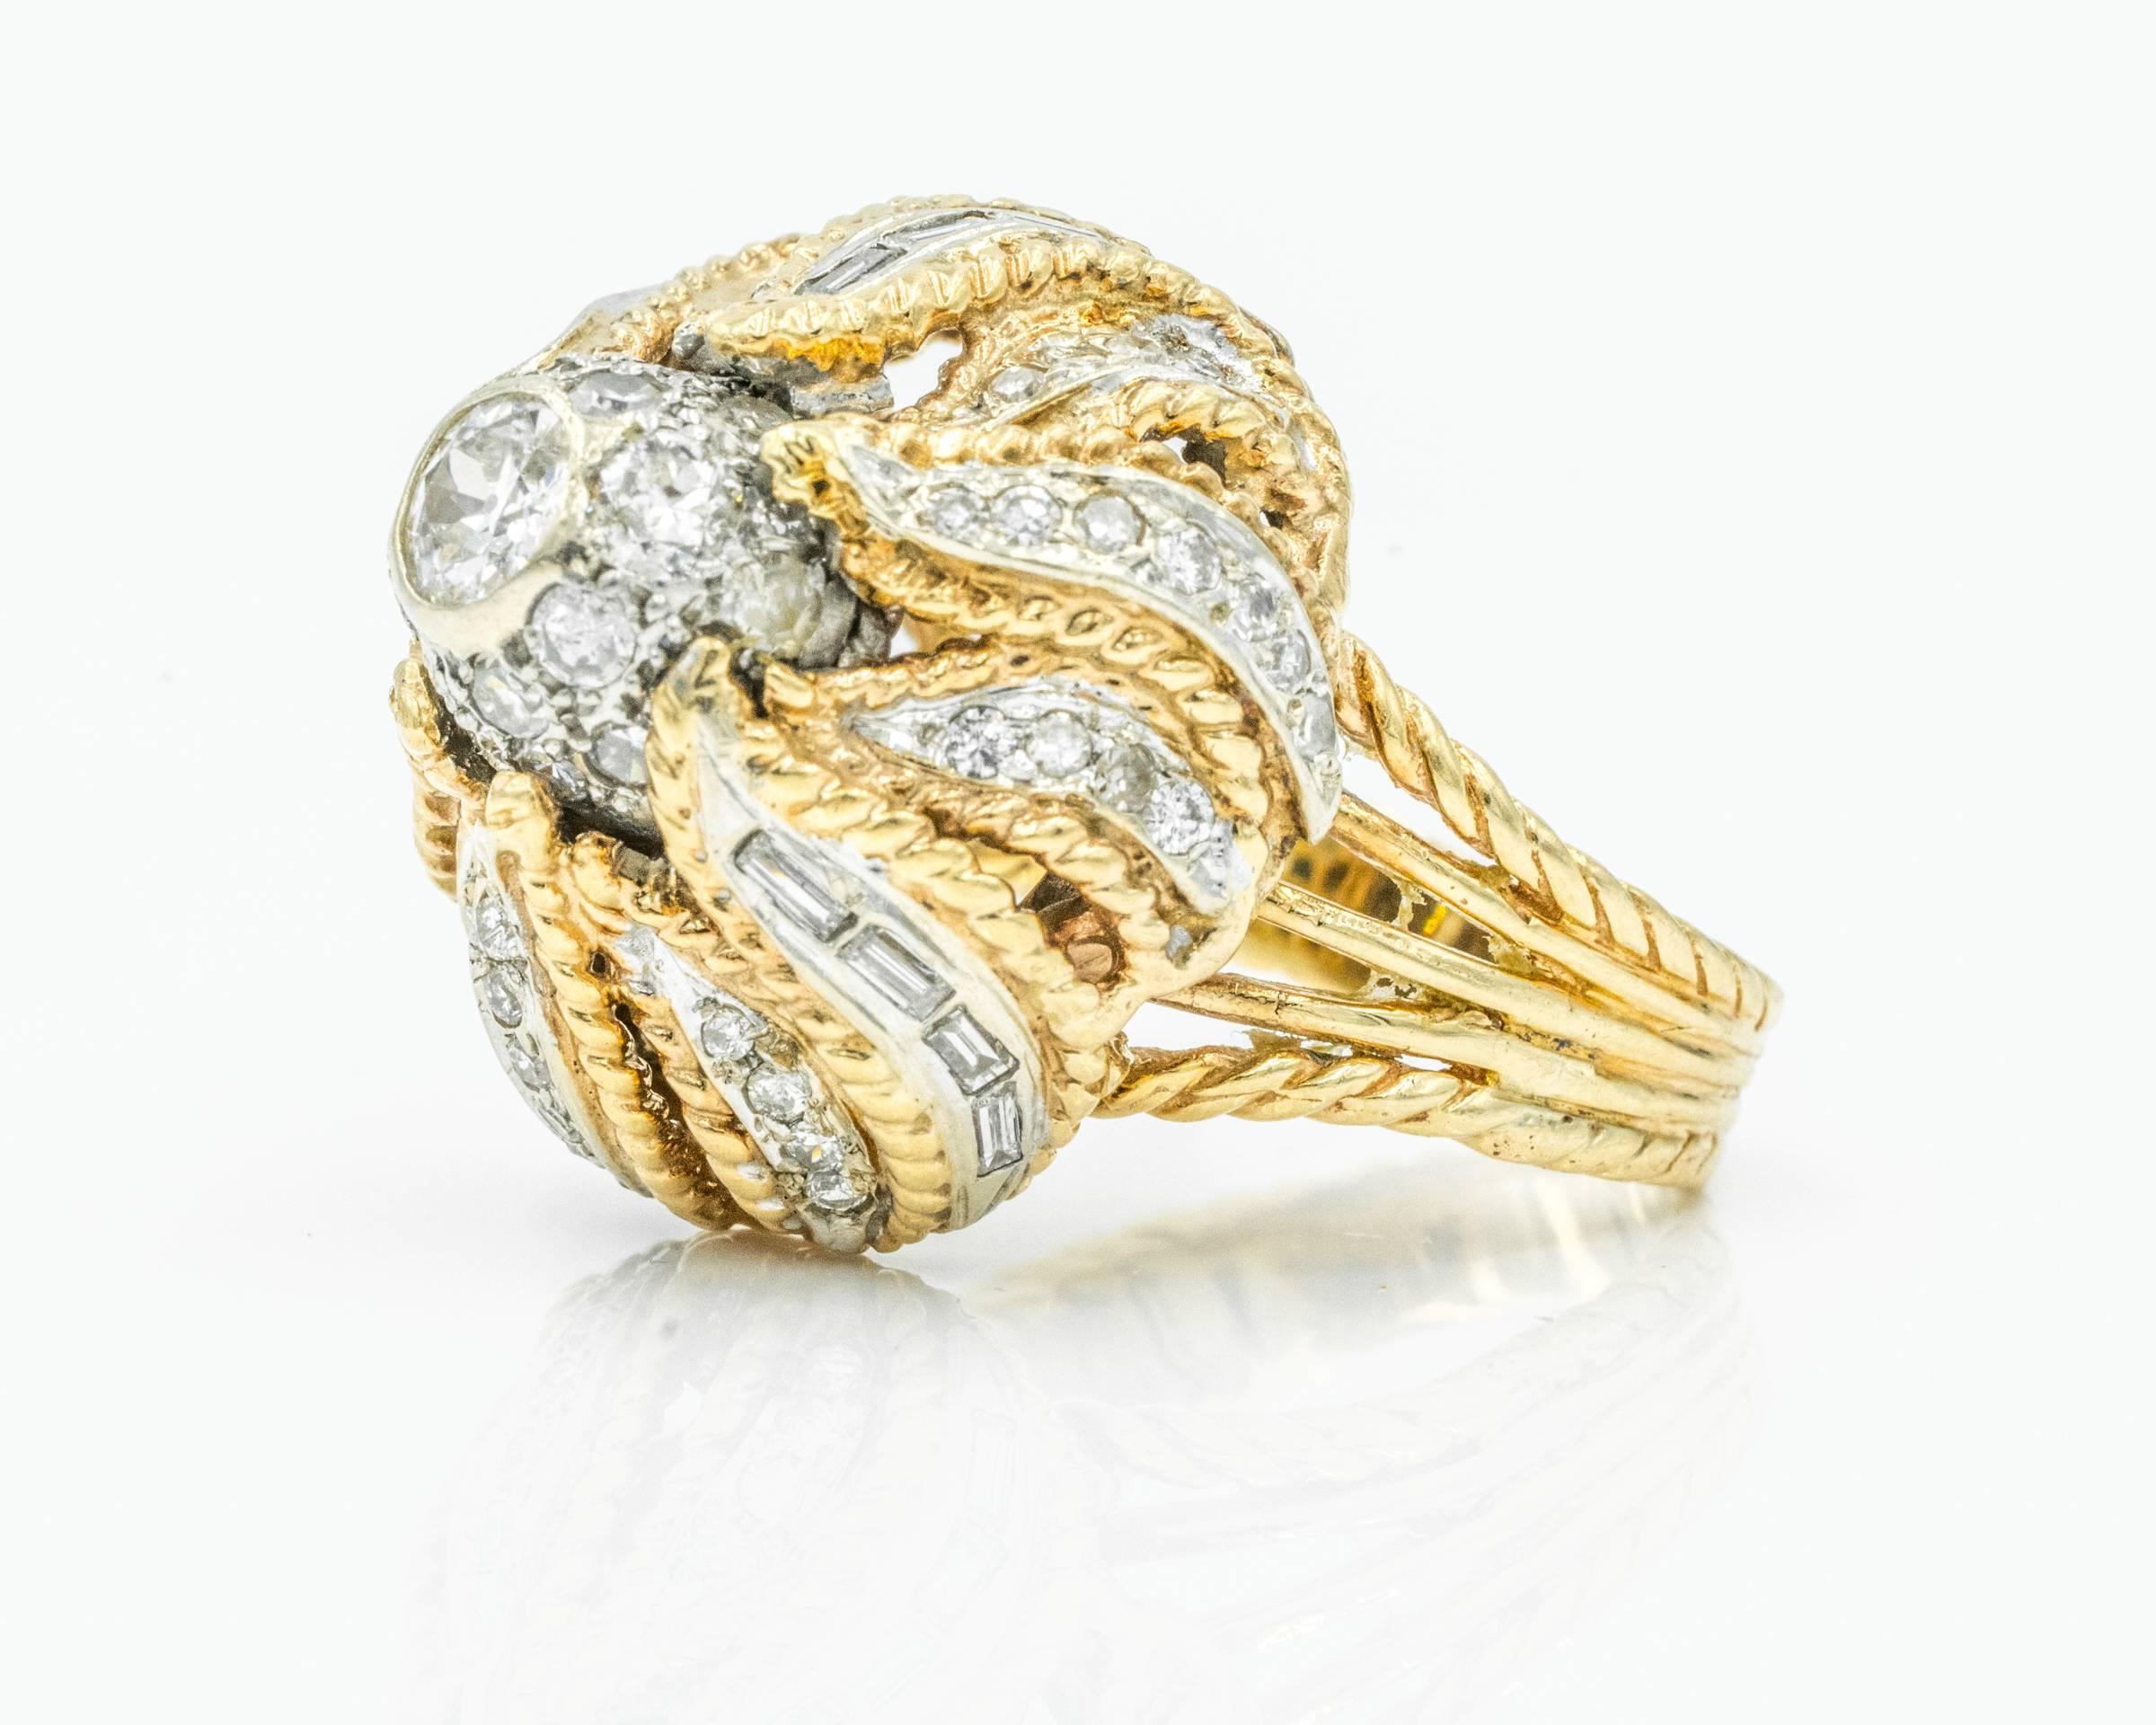 1960s Diamond Cocktail Ring with Floral Head Design, Ornate appearance. Crafted in 18 karat Yellow Gold and Platinum (where diamonds are set). Thick shank made of 5 rows of 18 karat gold that taper down, has a braided weave appearance. 
Diamond in